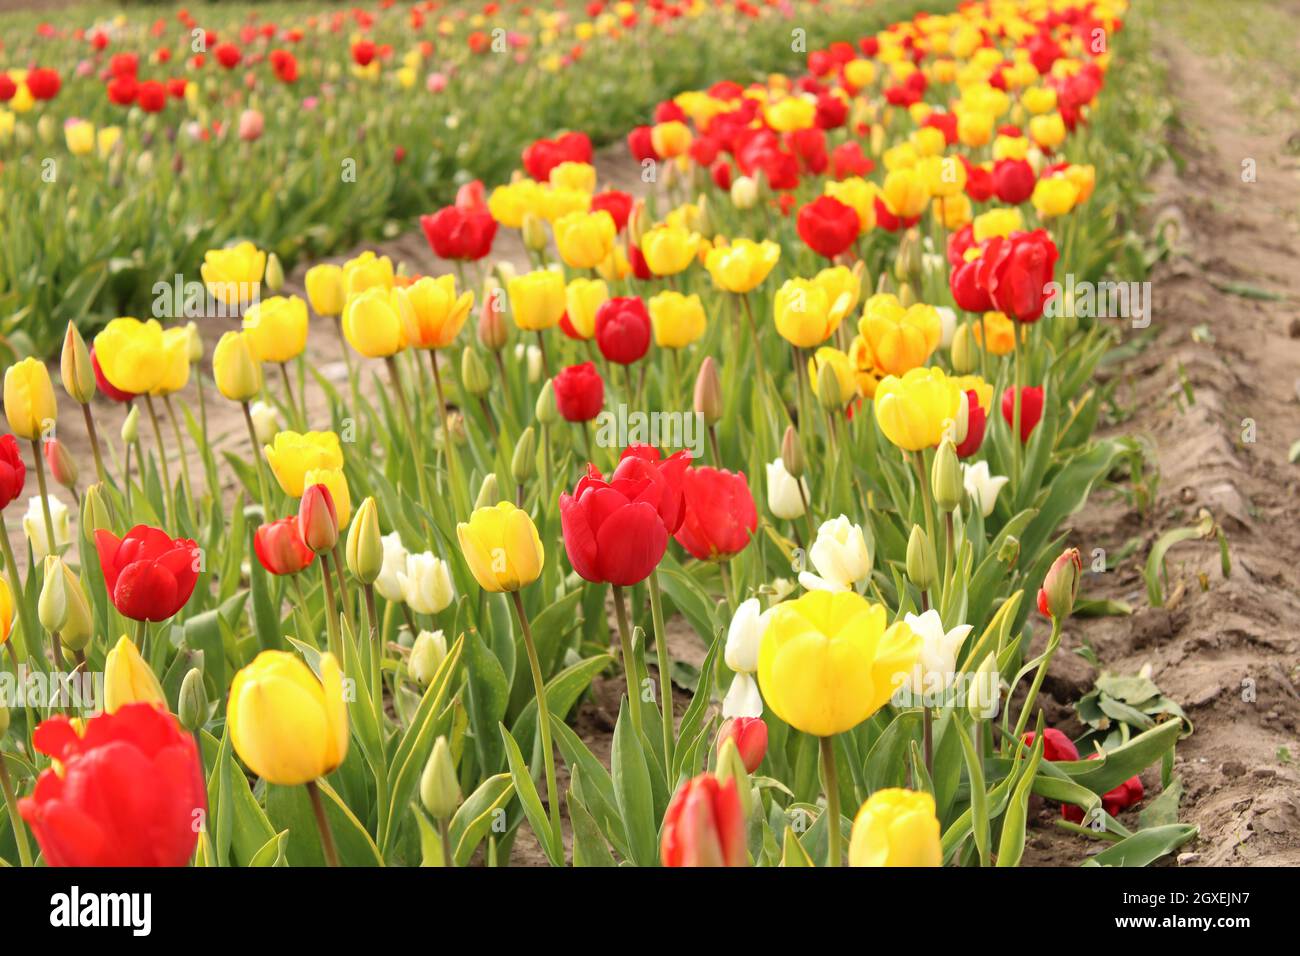 Red and Yellow tulips field Stock Photo